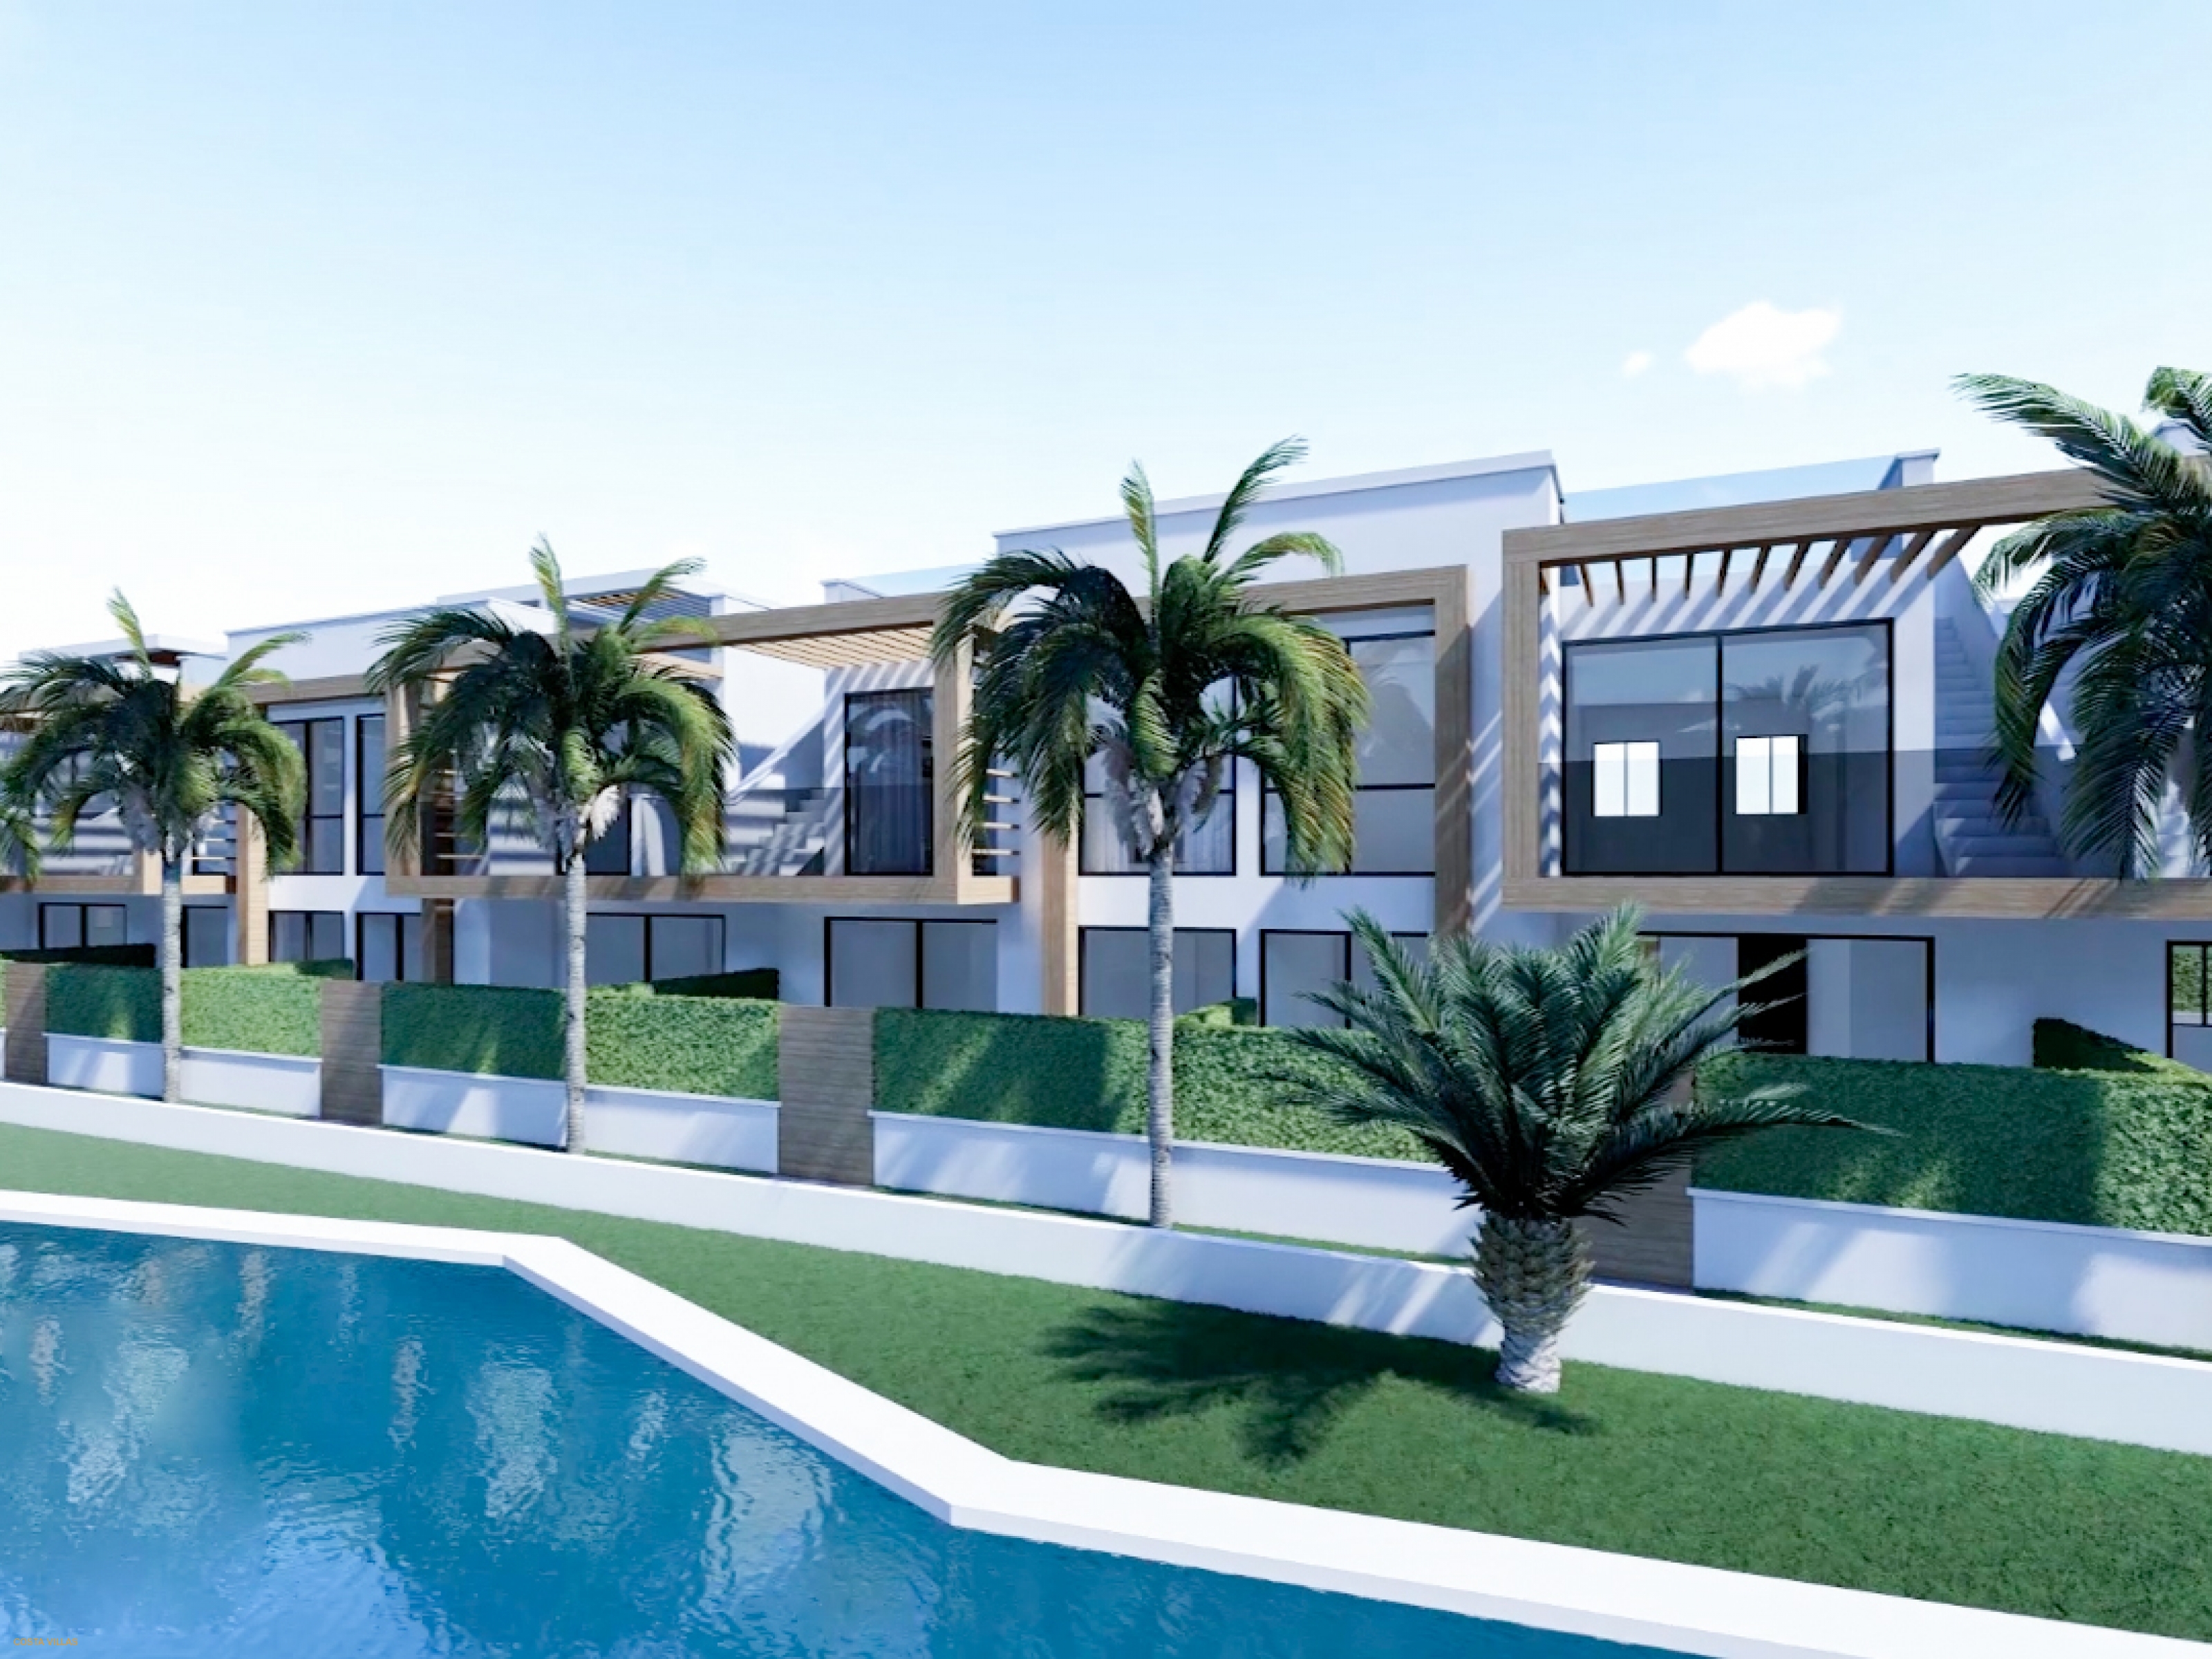 Brand new development of 40 apartments in great location